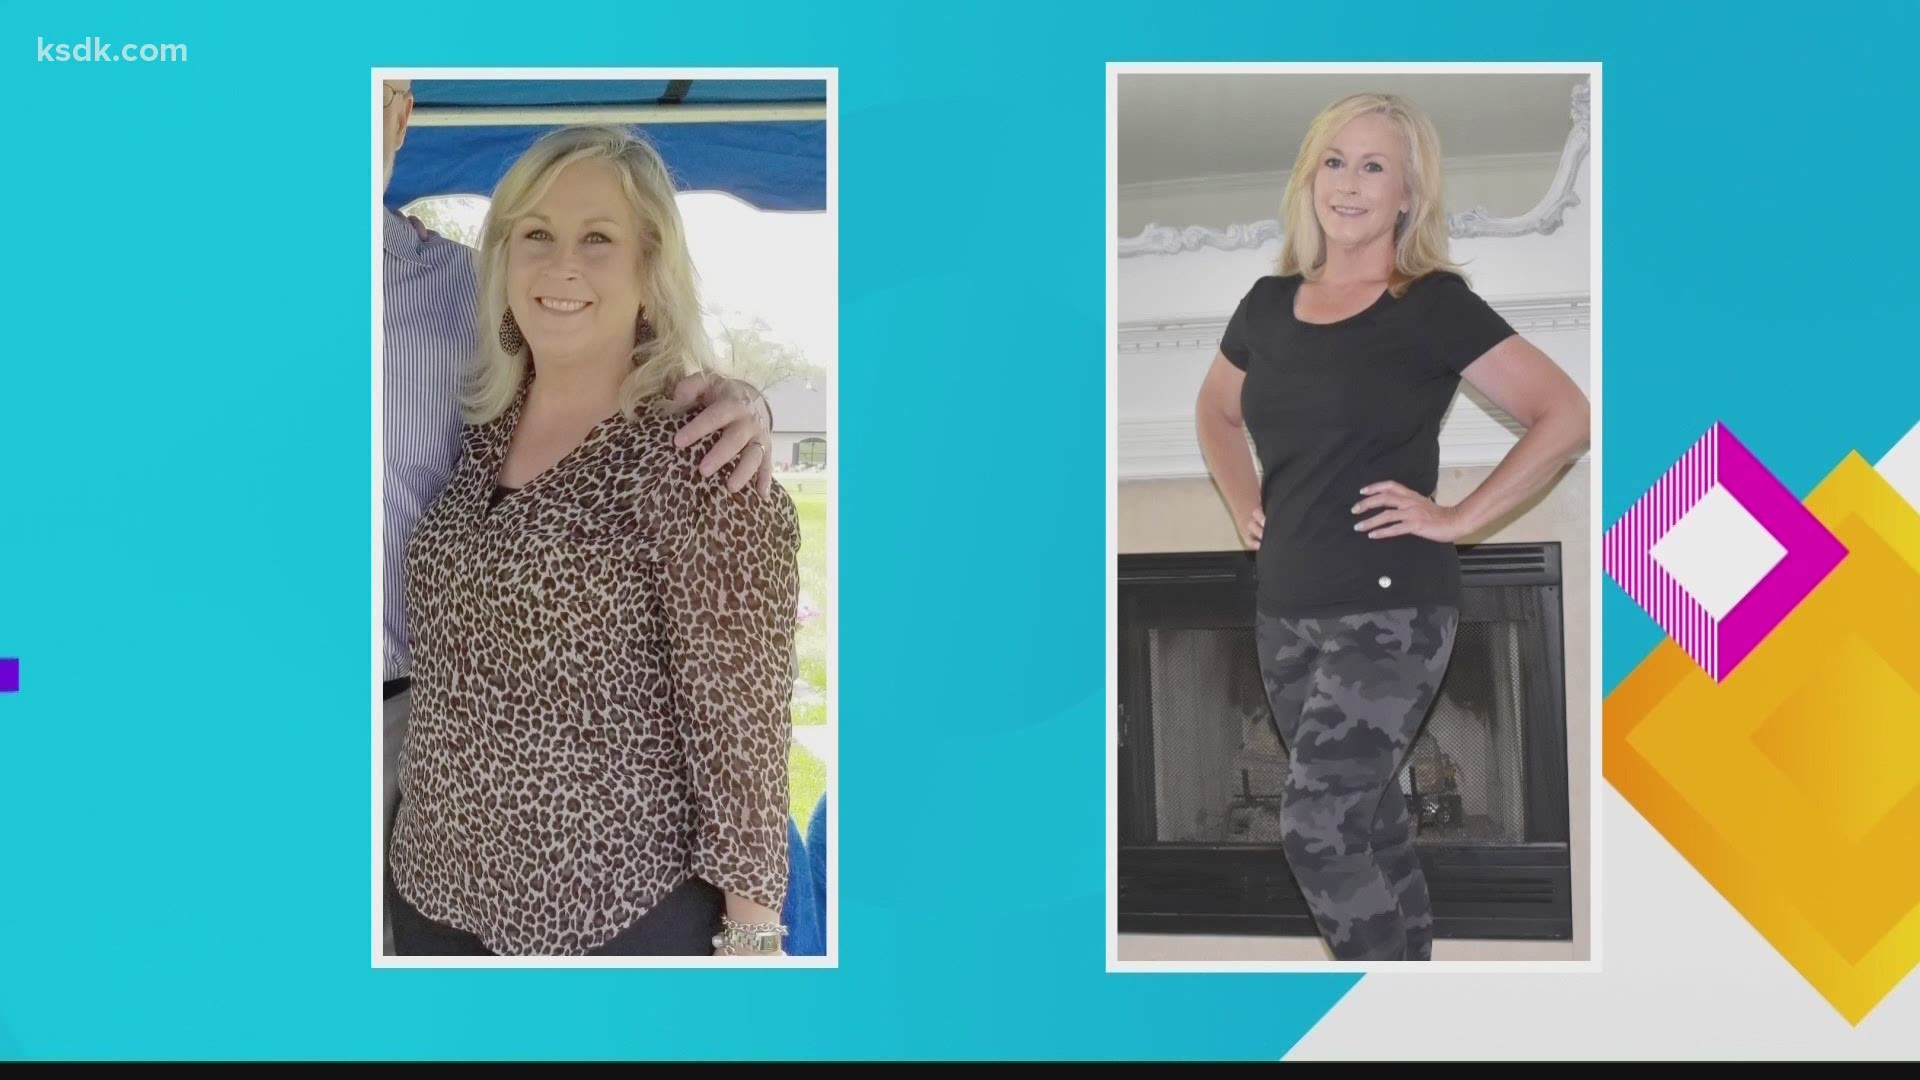 Meet another successful client of Charles D'Angelo's who was able to transform her life.